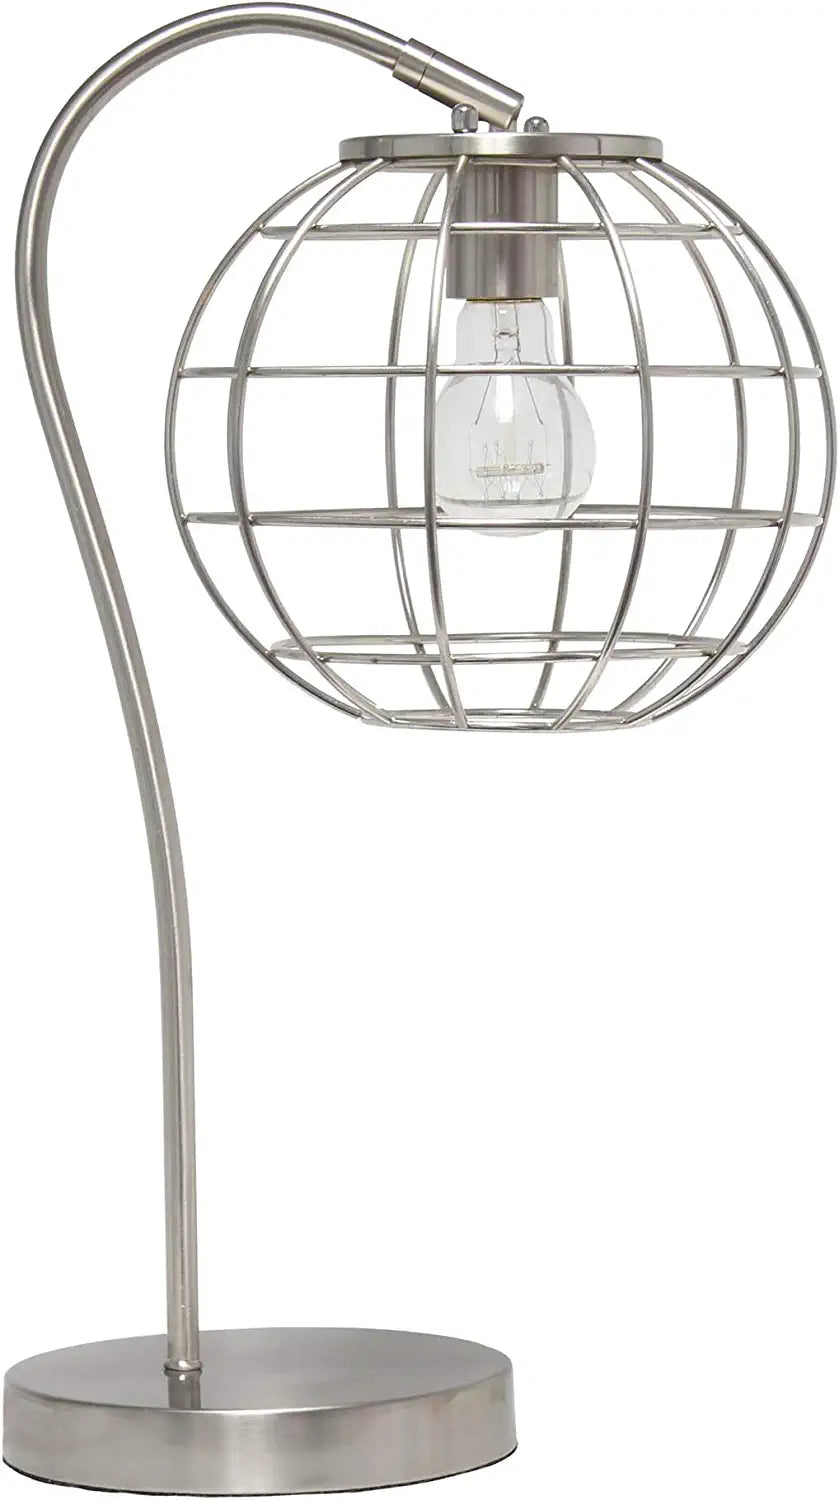 Lalia Home Decorative Arched Metal Cage Table Lamp, Brushed Nickel